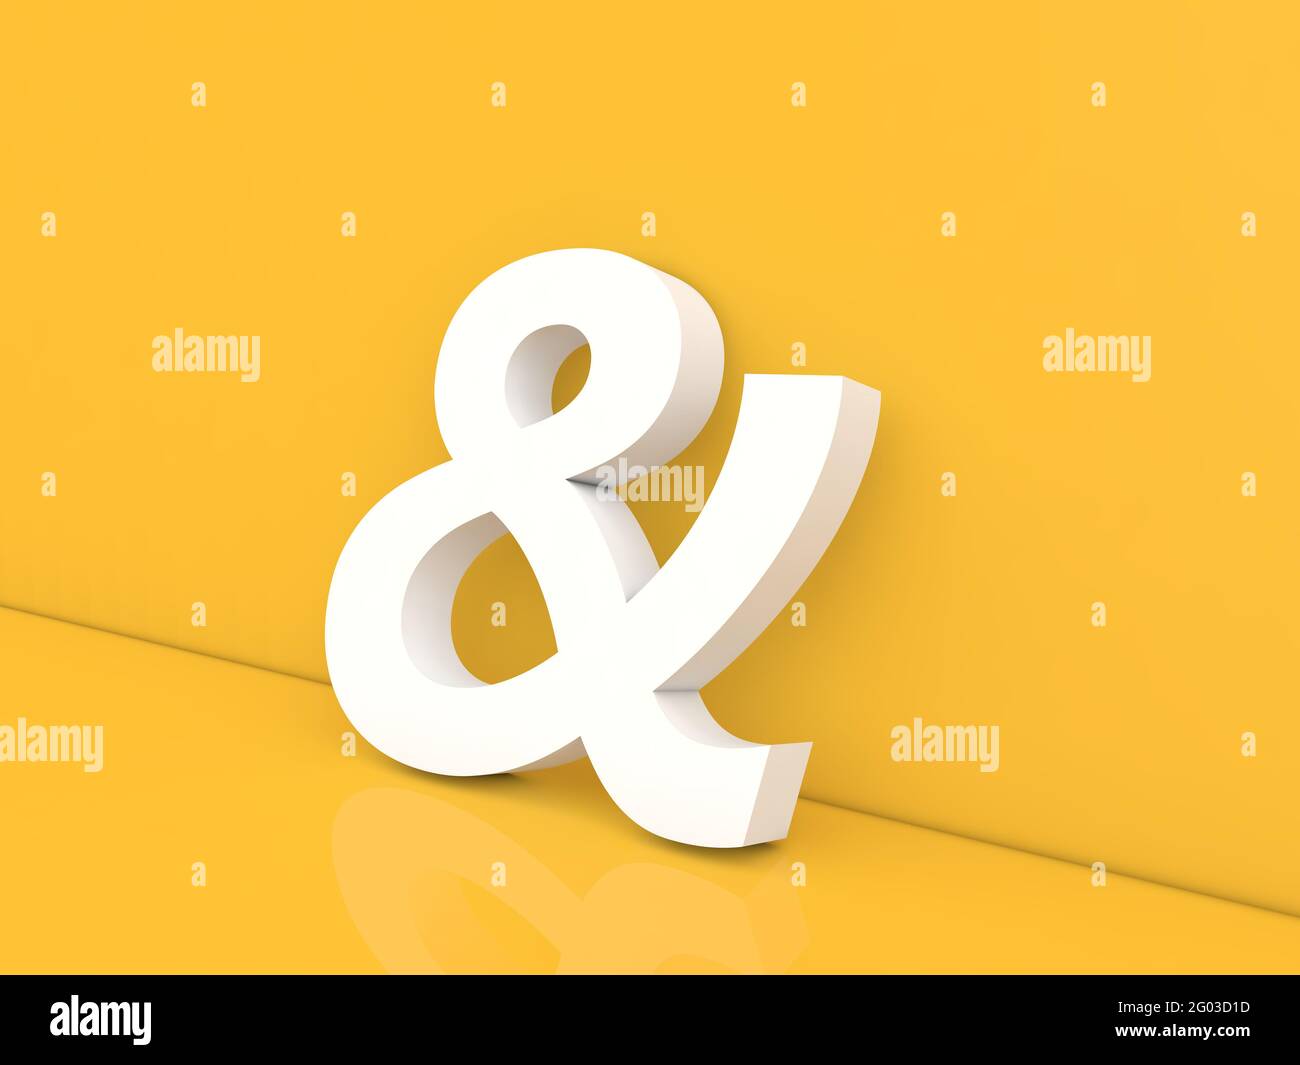 Ampersand symbol on a yellow background. 3d render illustration. Stock Photo